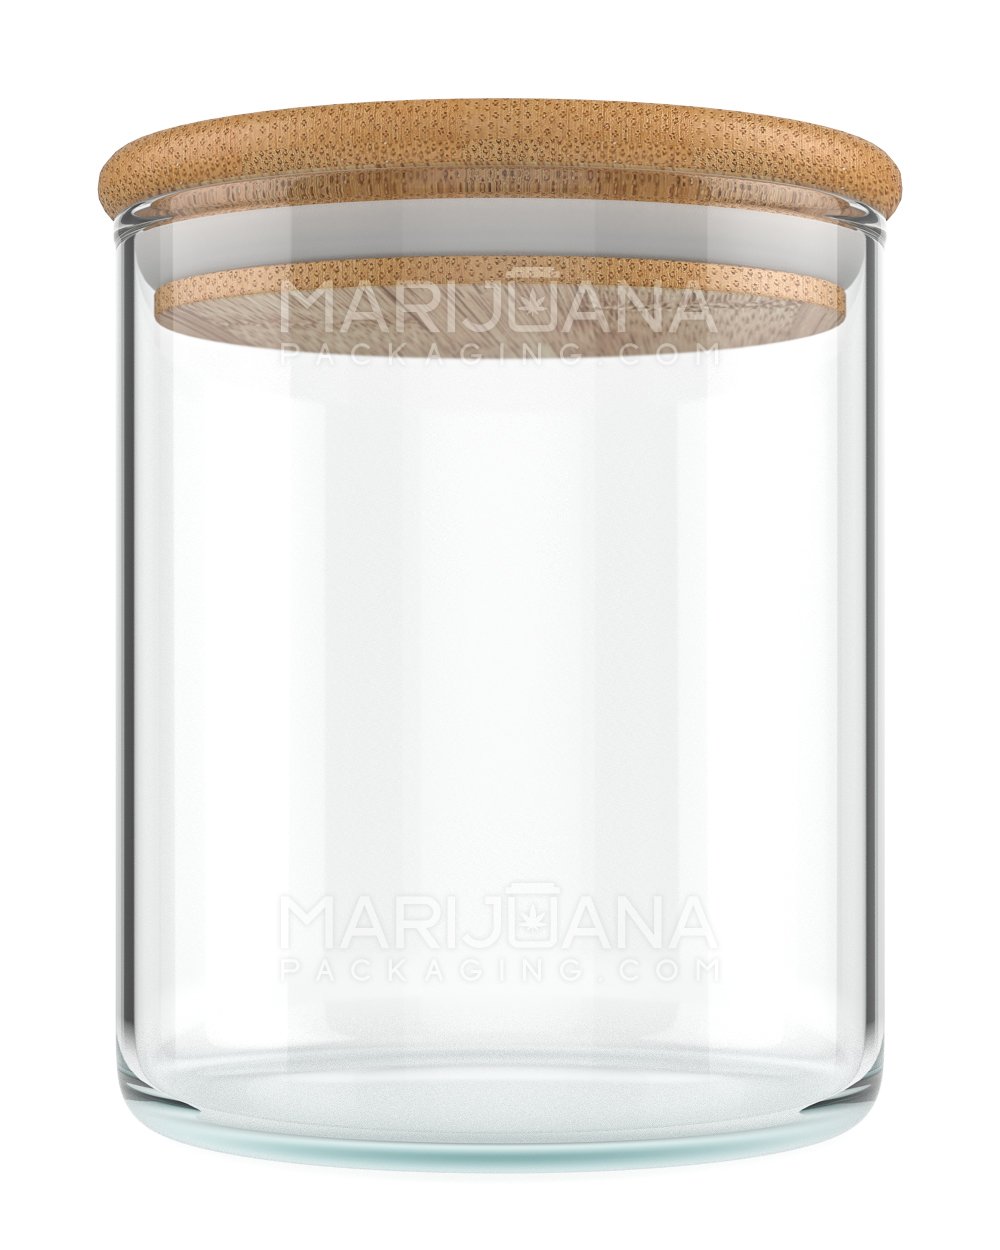 Glass Jars with Wooden Lids For Cannabis Wholesale Suppliers